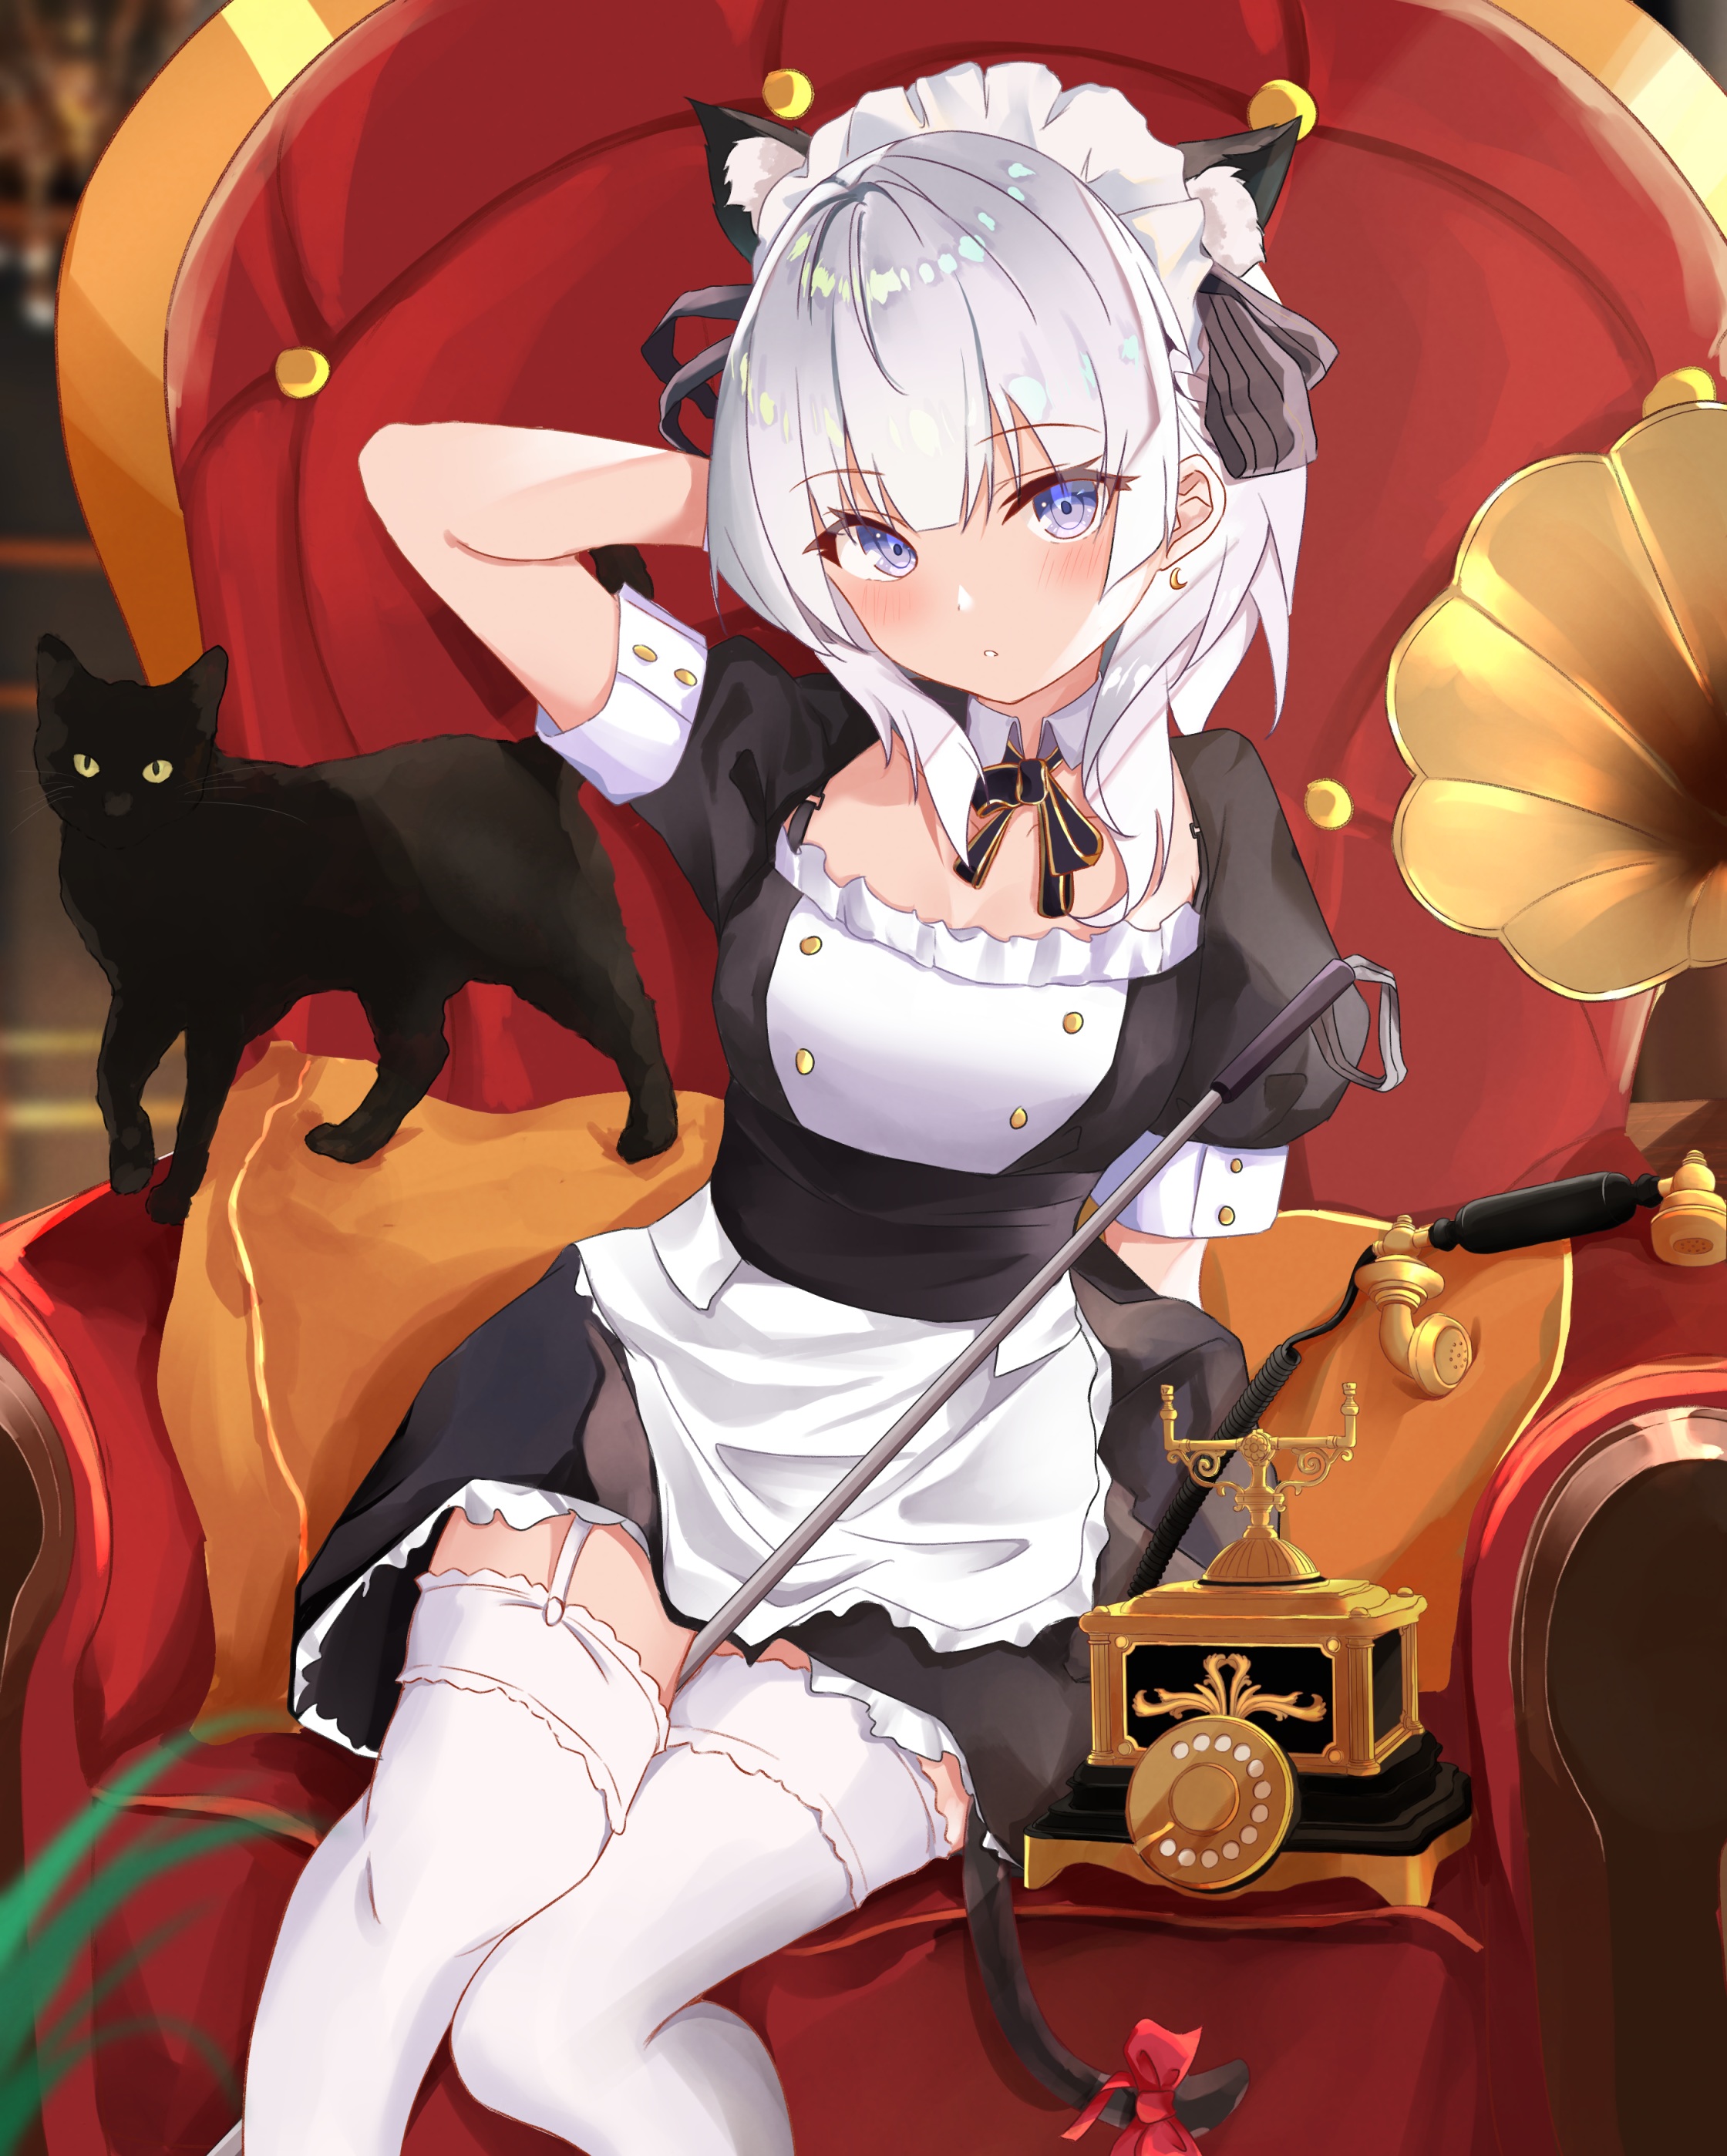 Anime 2240x2797 anime anime girls portrait display cats maid maid outfit stockings blushing